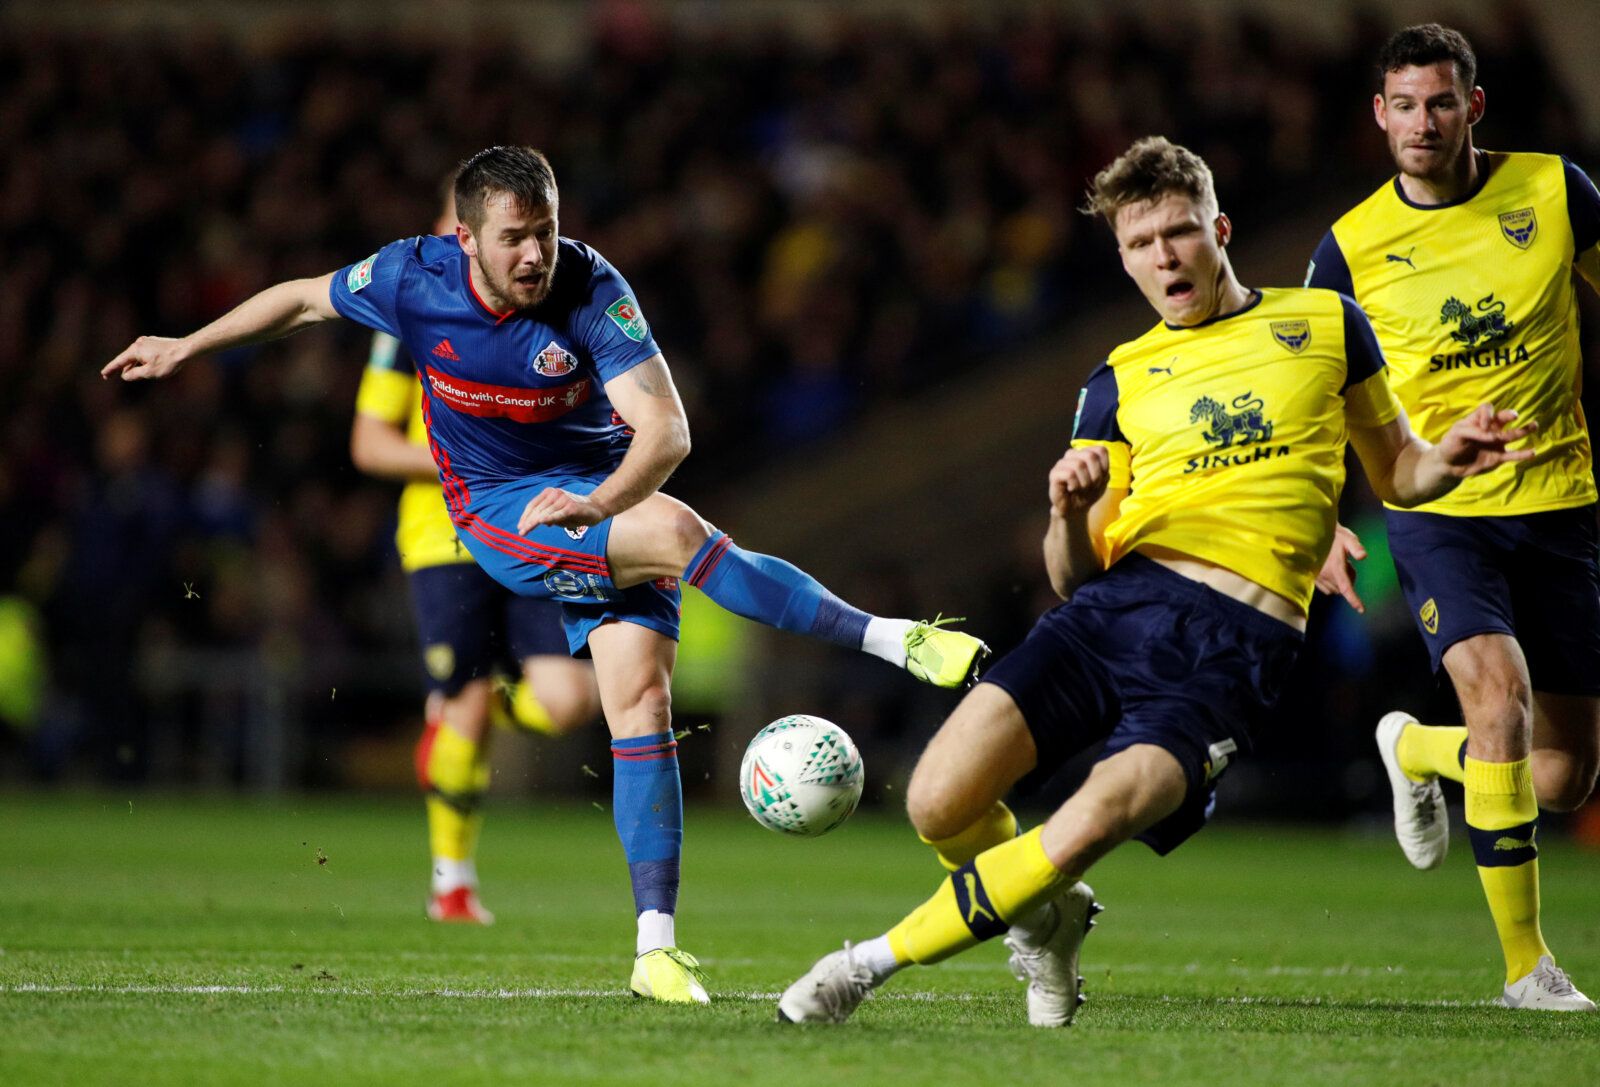 Soccer Football - Carabao Cup - Fourth Round - Oxford United v Sunderland - Kassam Stadium, Oxford, Britain - October 29, 2019  Sunderland's Marc McNulty in action with Oxford United’s Rob Dickie  Action Images/John Sibley  EDITORIAL USE ONLY. No use with unauthorized audio, video, data, fixture lists, club/league logos or 